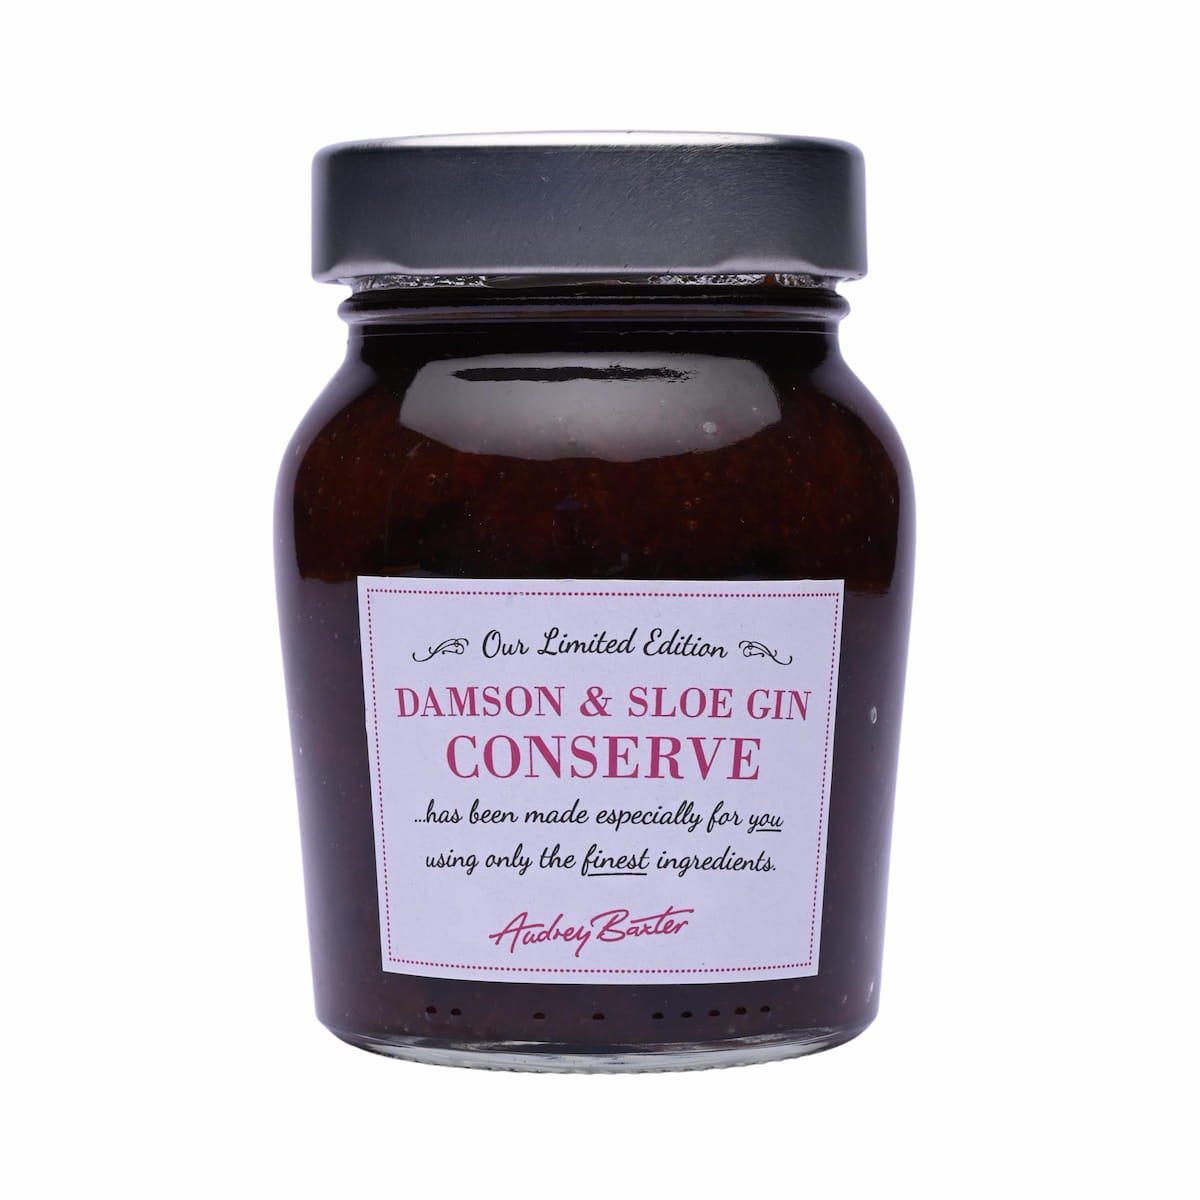 Add 1 x Baxters Limited Edition Damson and Sloe Gin Conserve